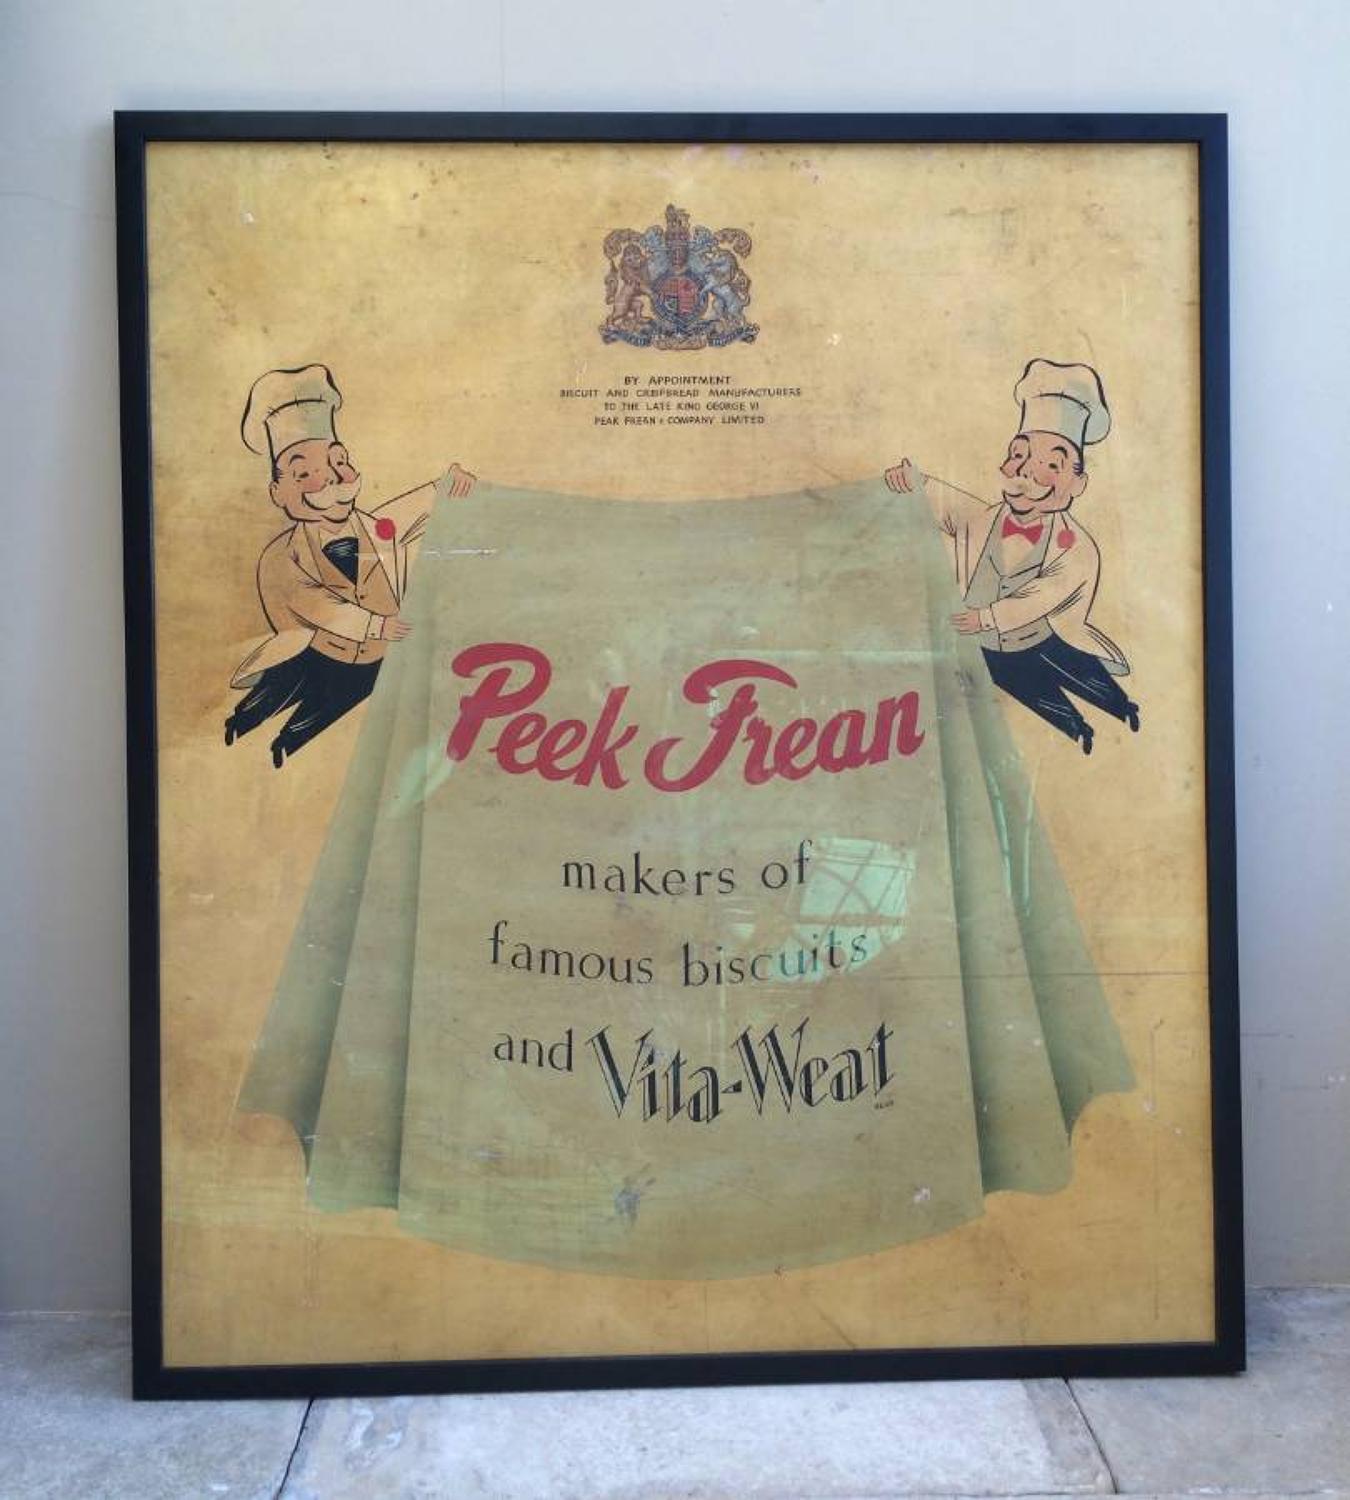 1950s Large Shops Advertising Board for Peek Frean Biscuits